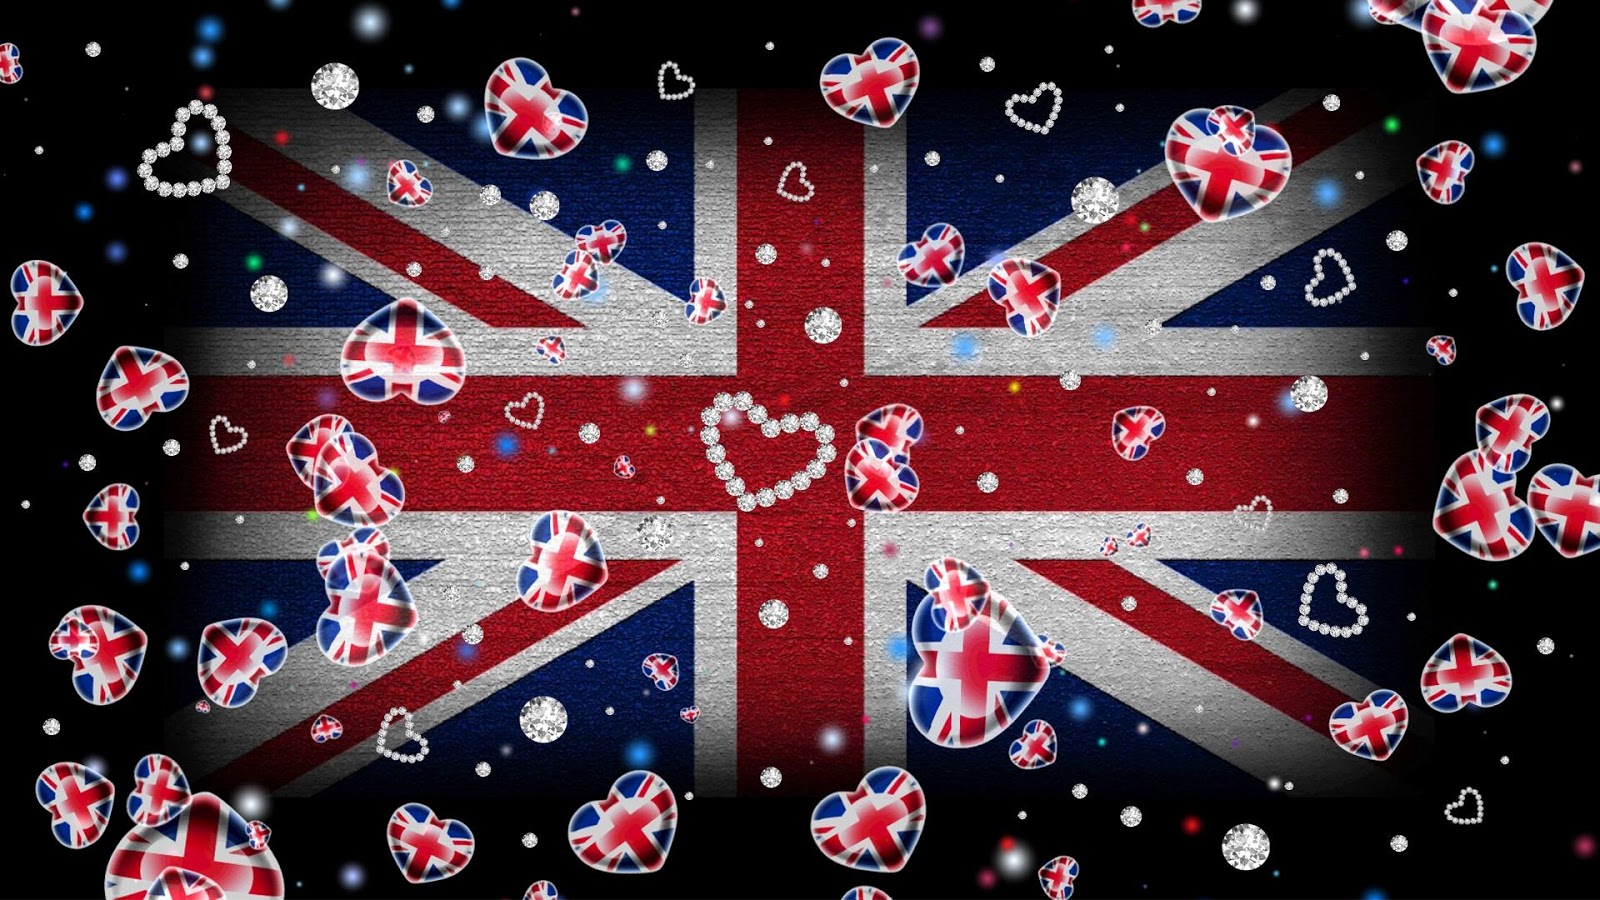 Britain Flag Wallpaper - Android Apps on Google Play